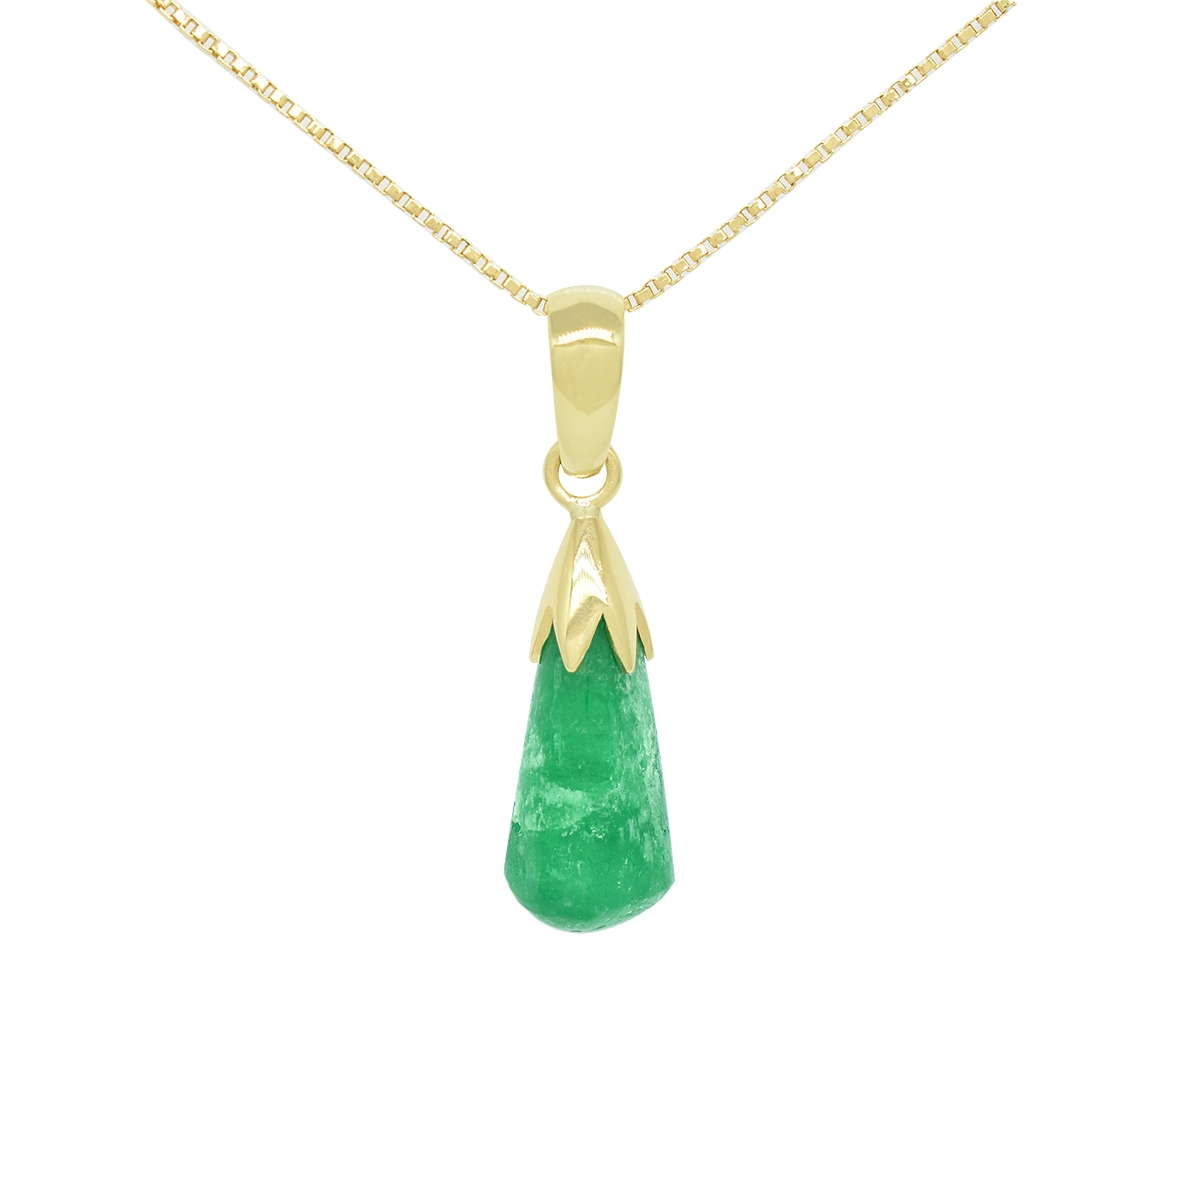 Bead Style 3.09 Ct. Natural Emerald in 18K Gold Pendant